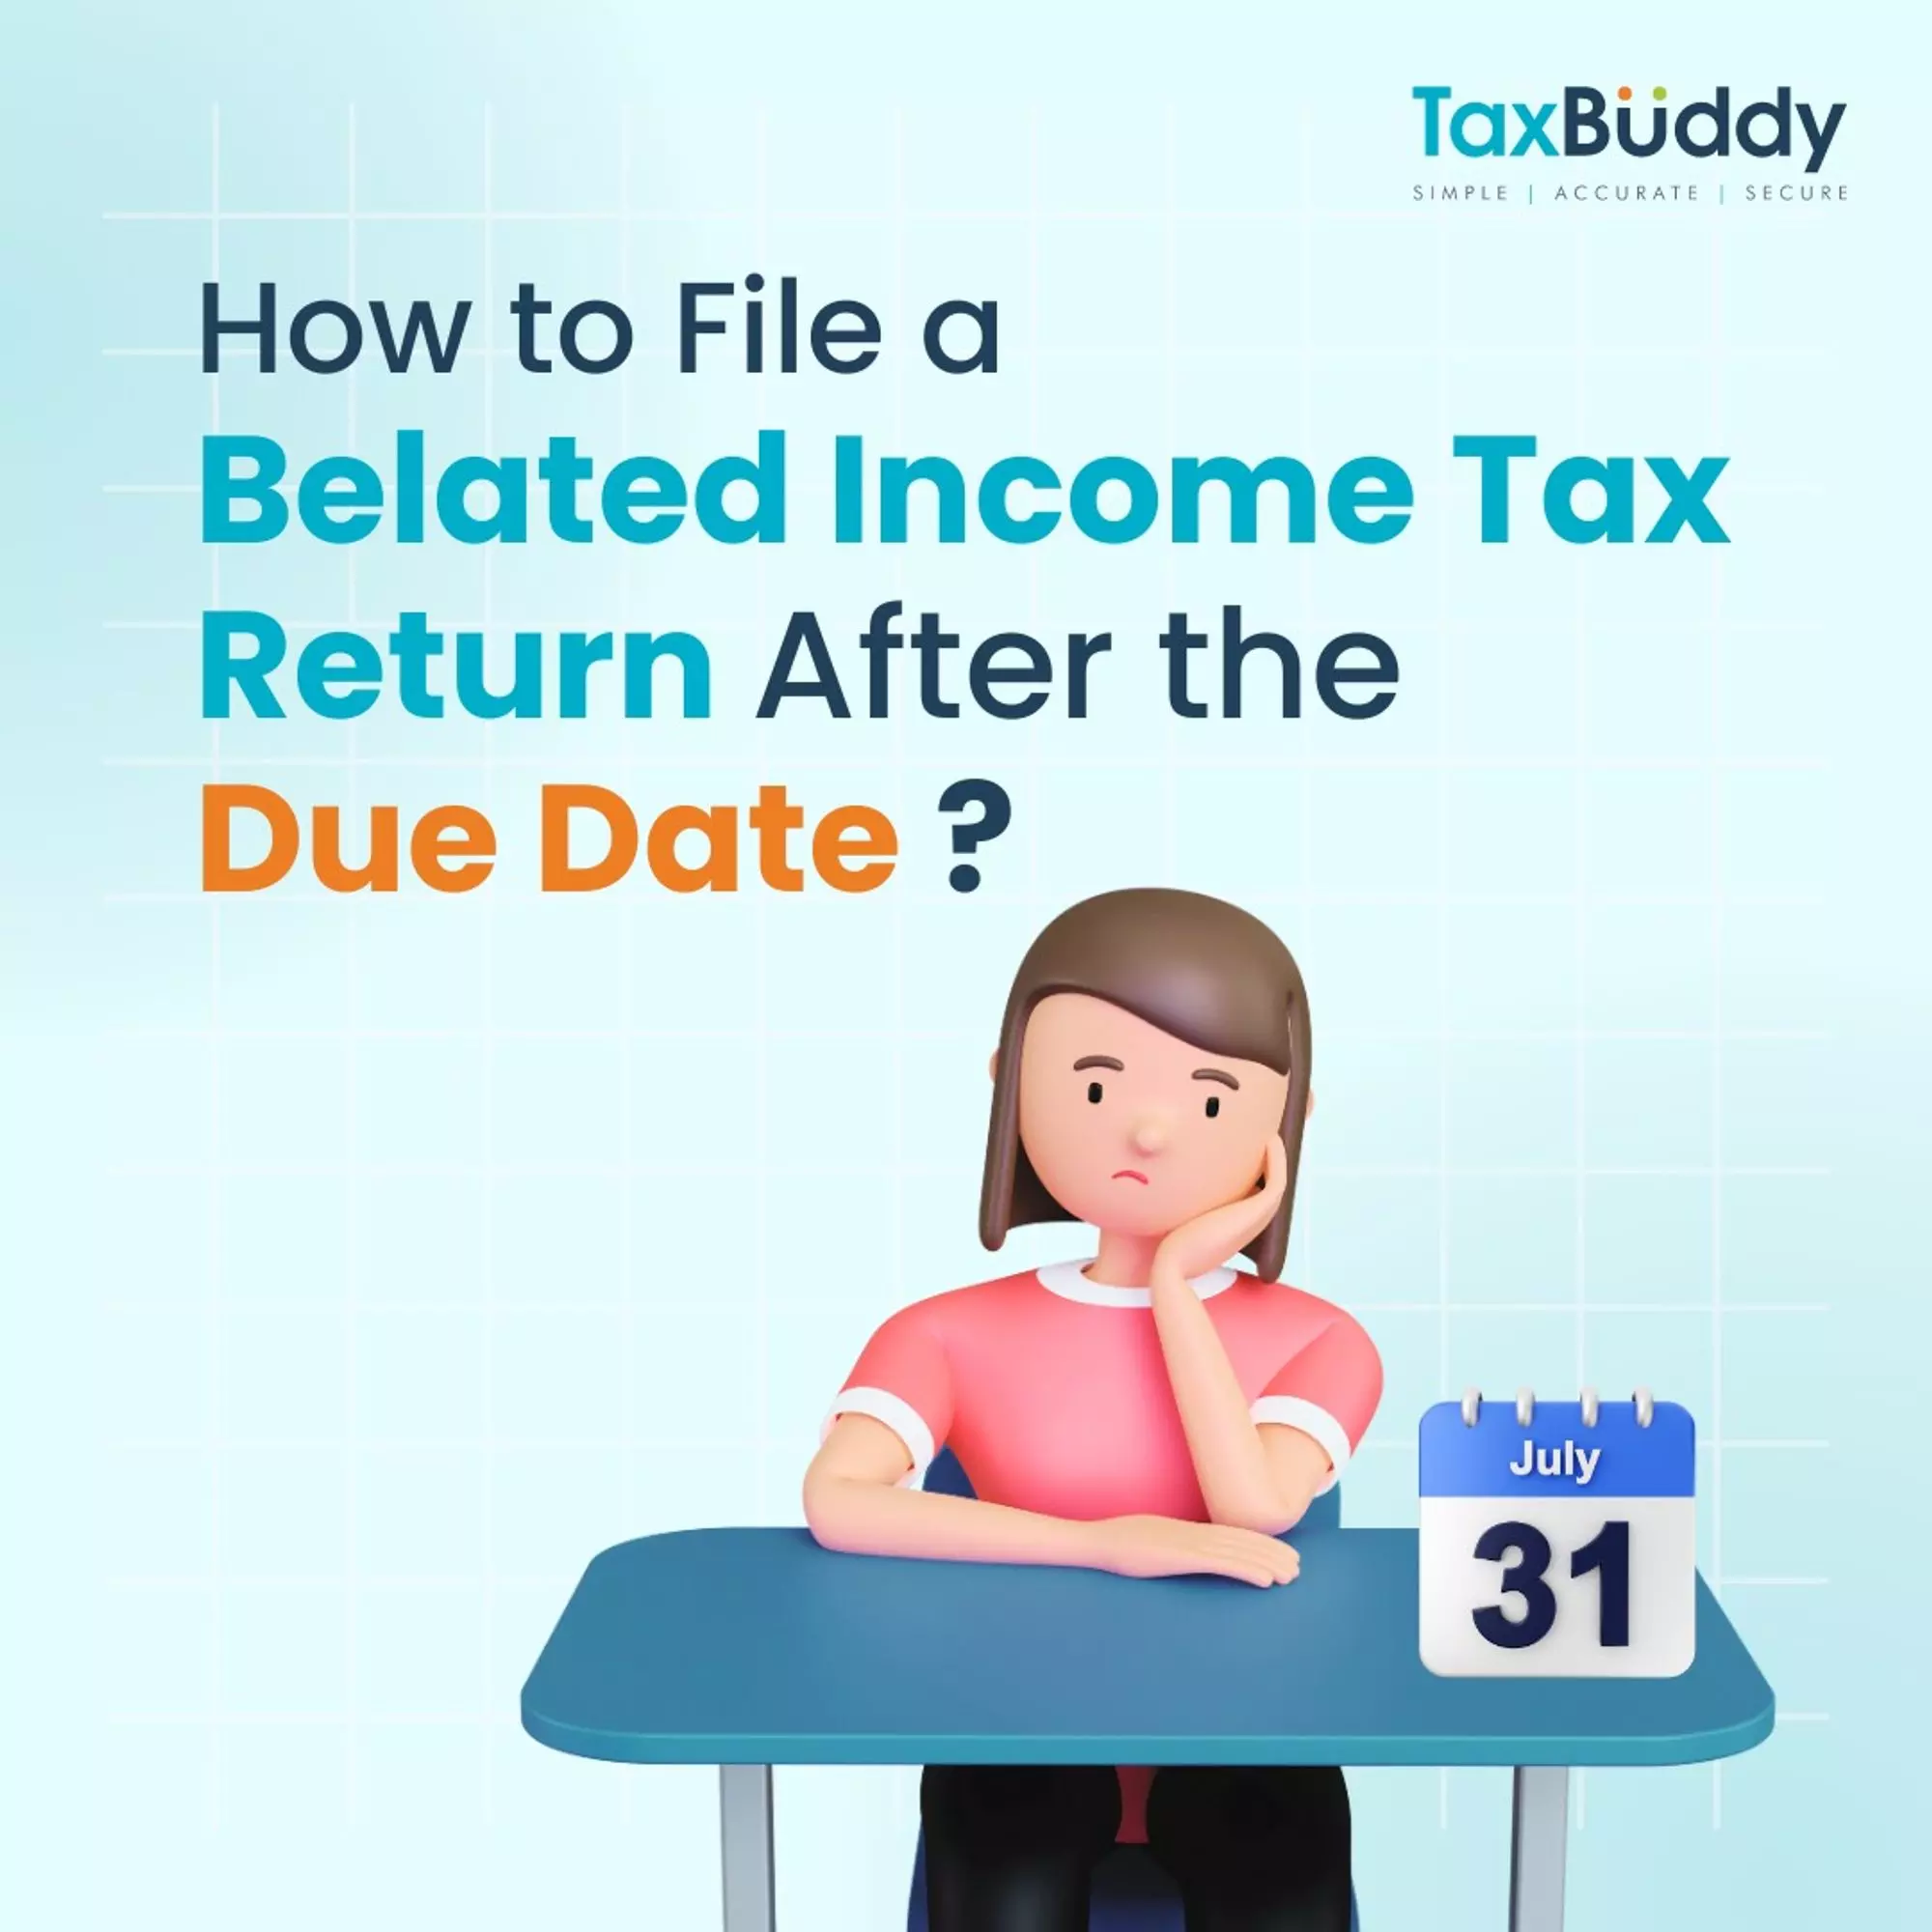 How to File a Belated Income Tax Return After the Due Date?